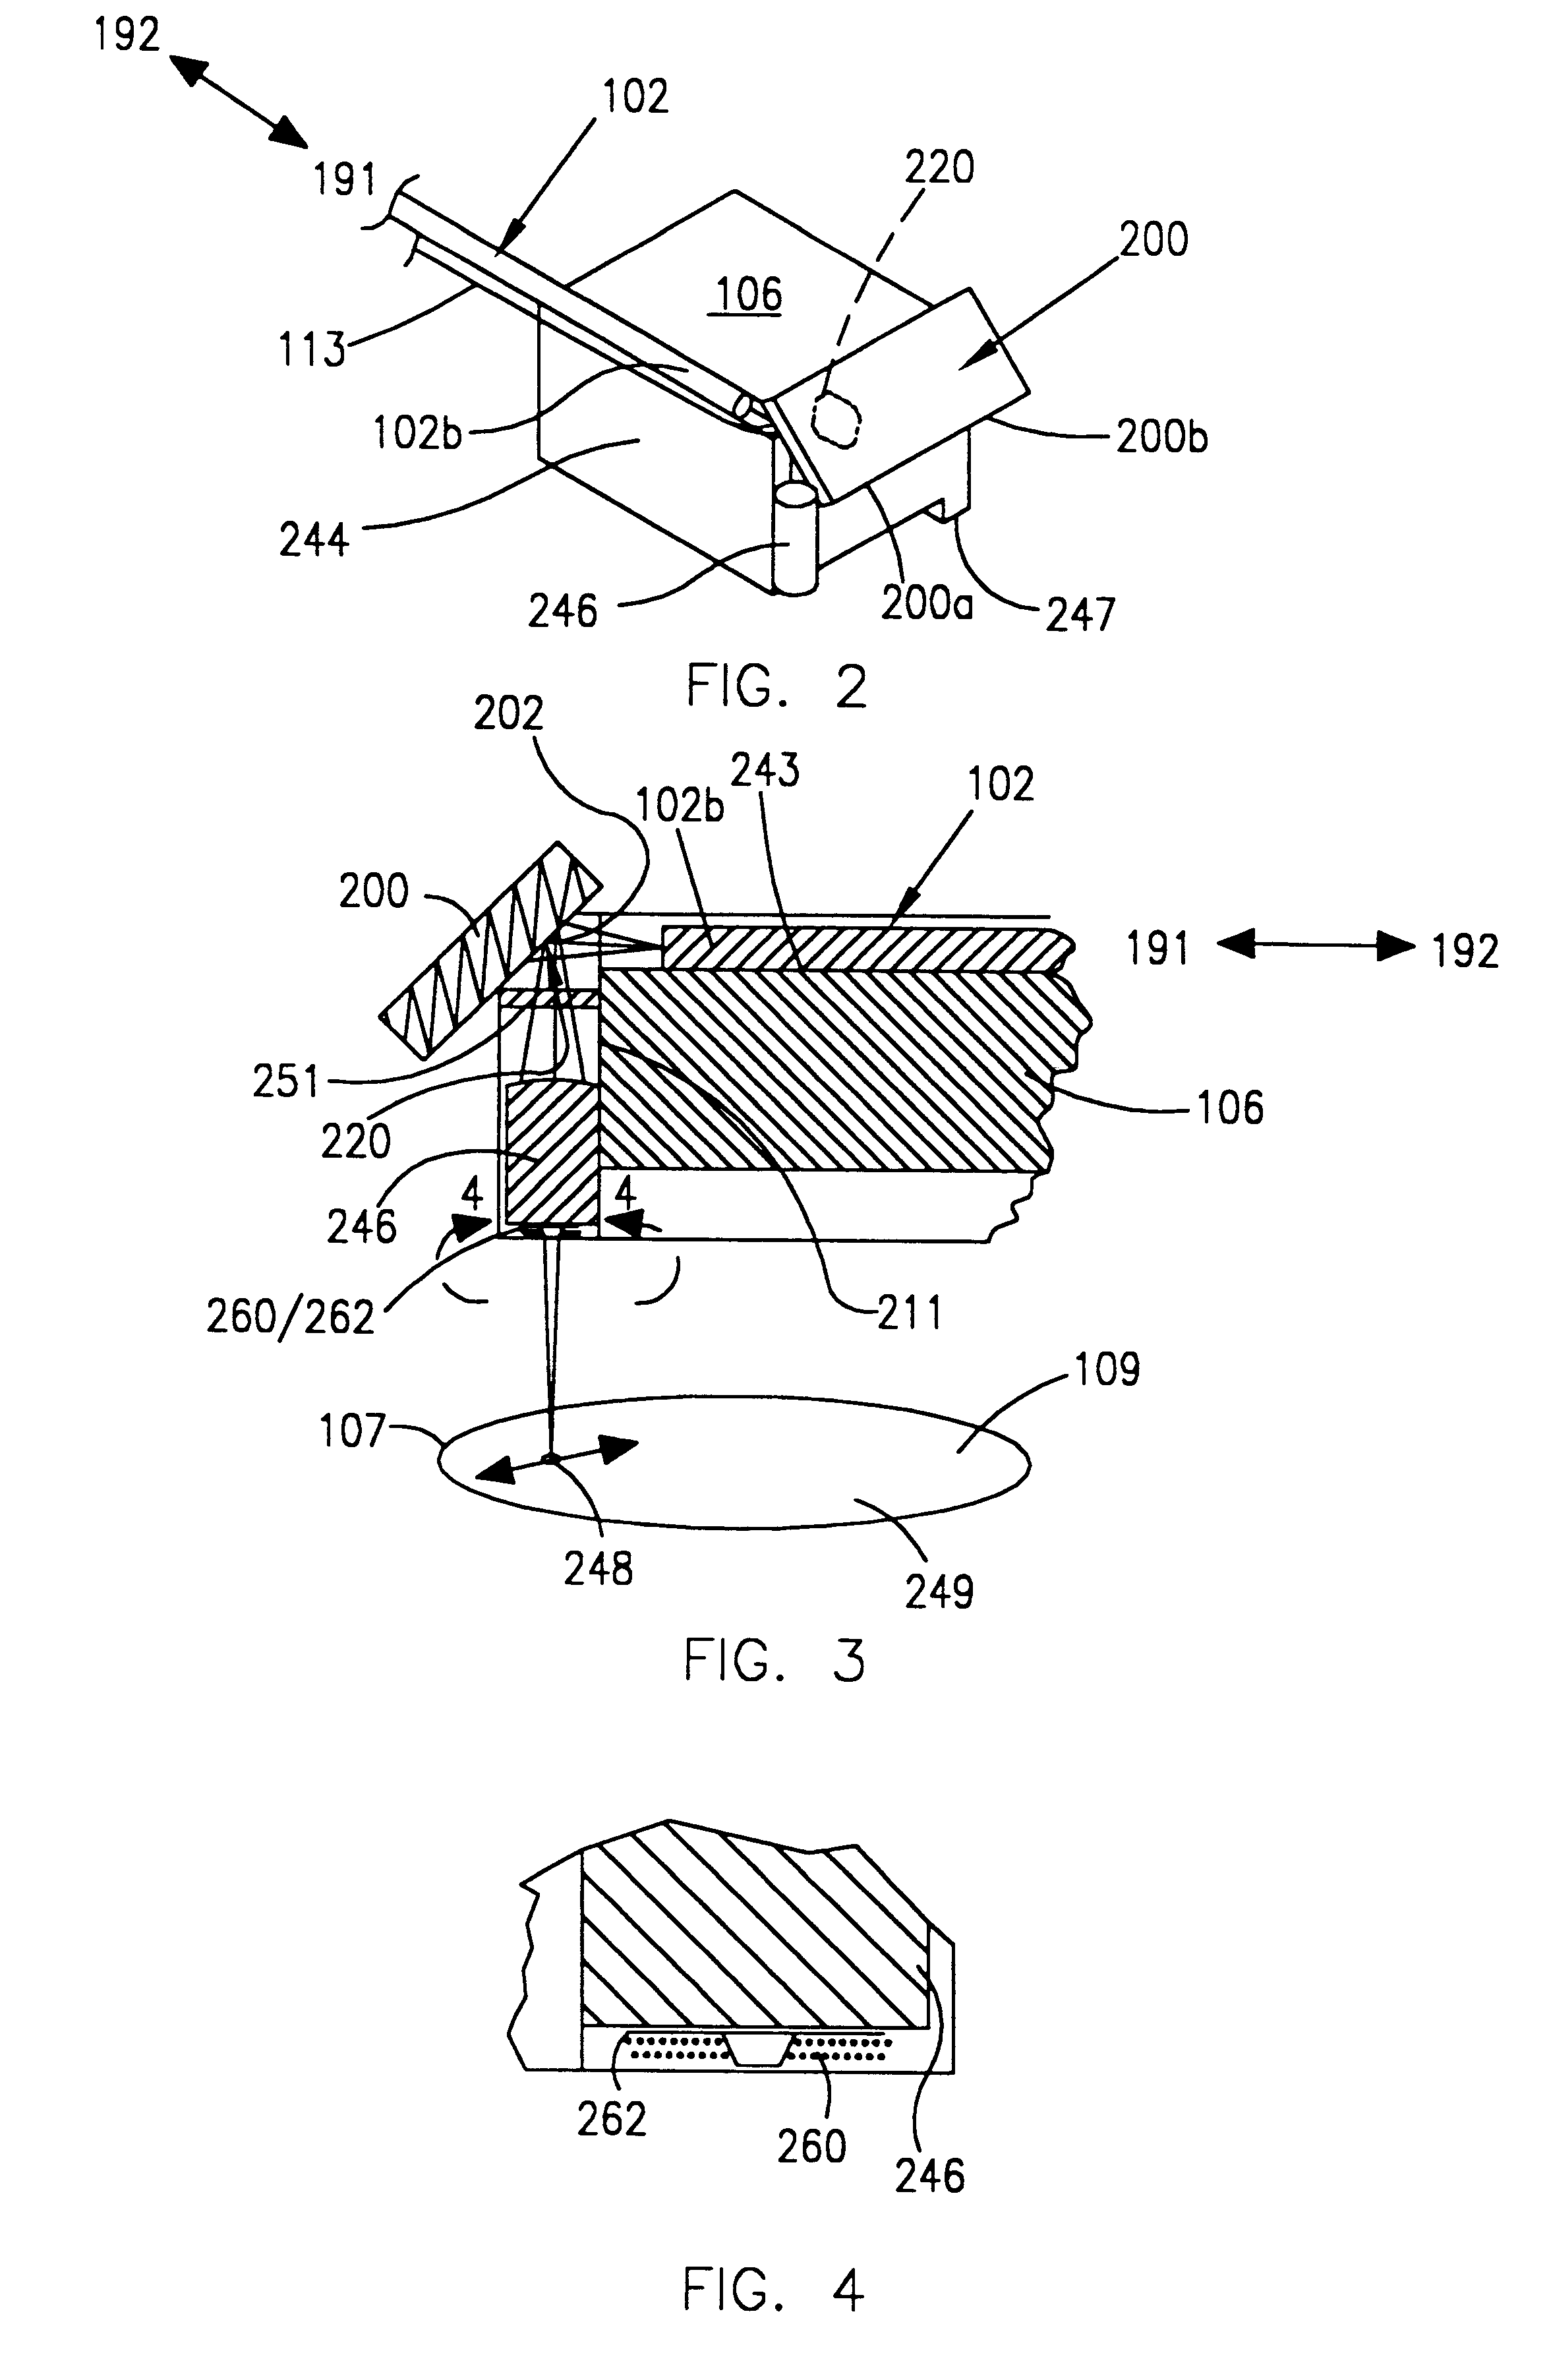 Method for processing a plurality of micro-machined mirror assemblies